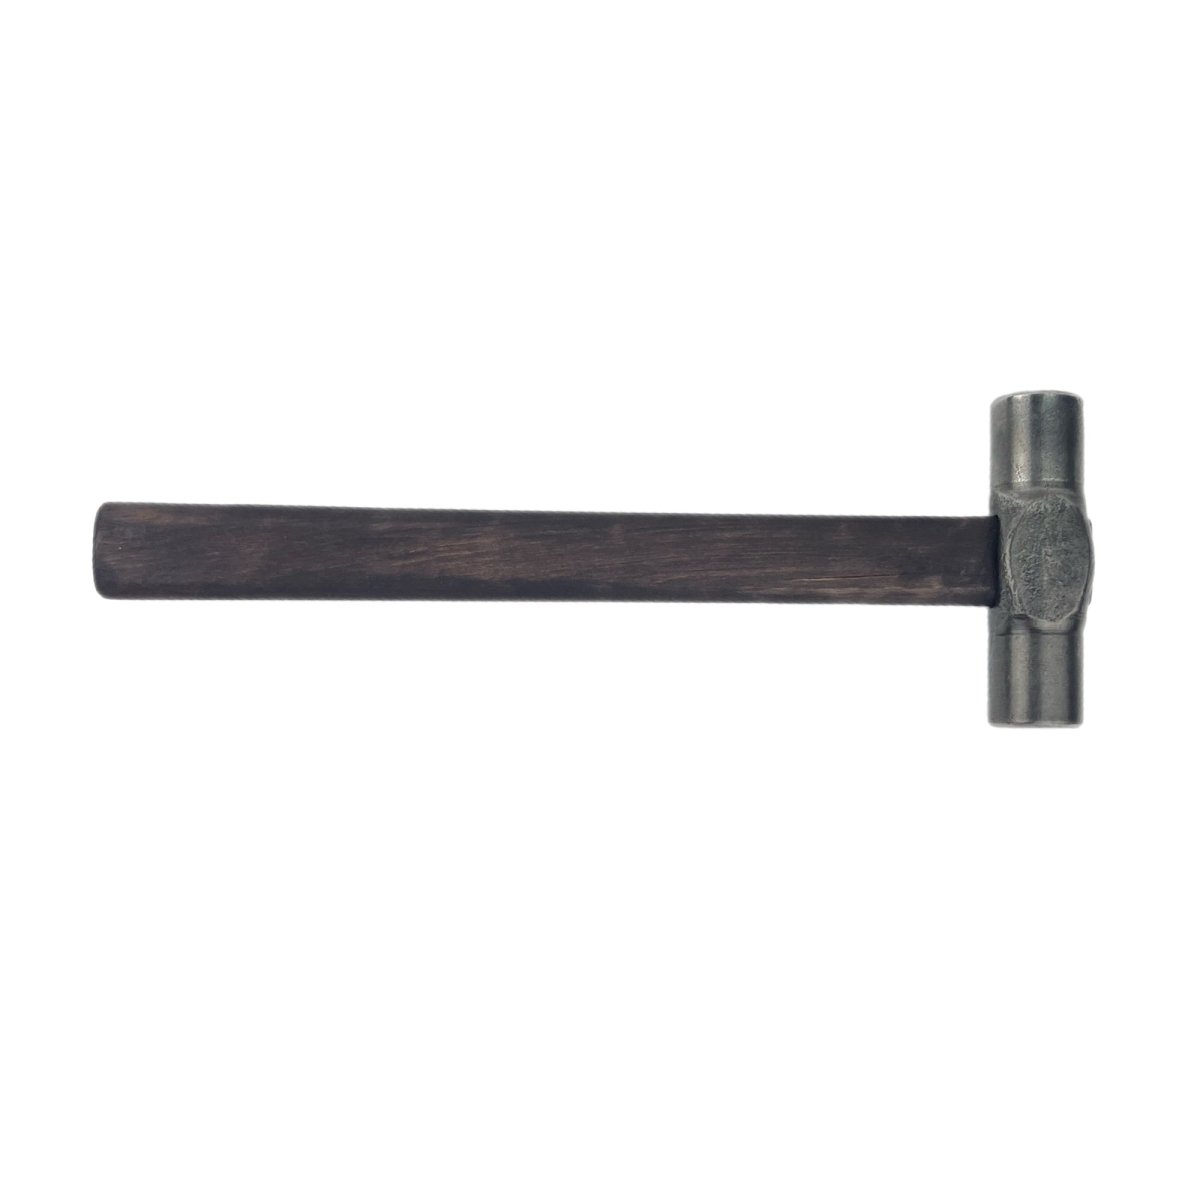 Hand-forged planishing hammer - Double headed round hammer for blacksmithing from AncientSmithy